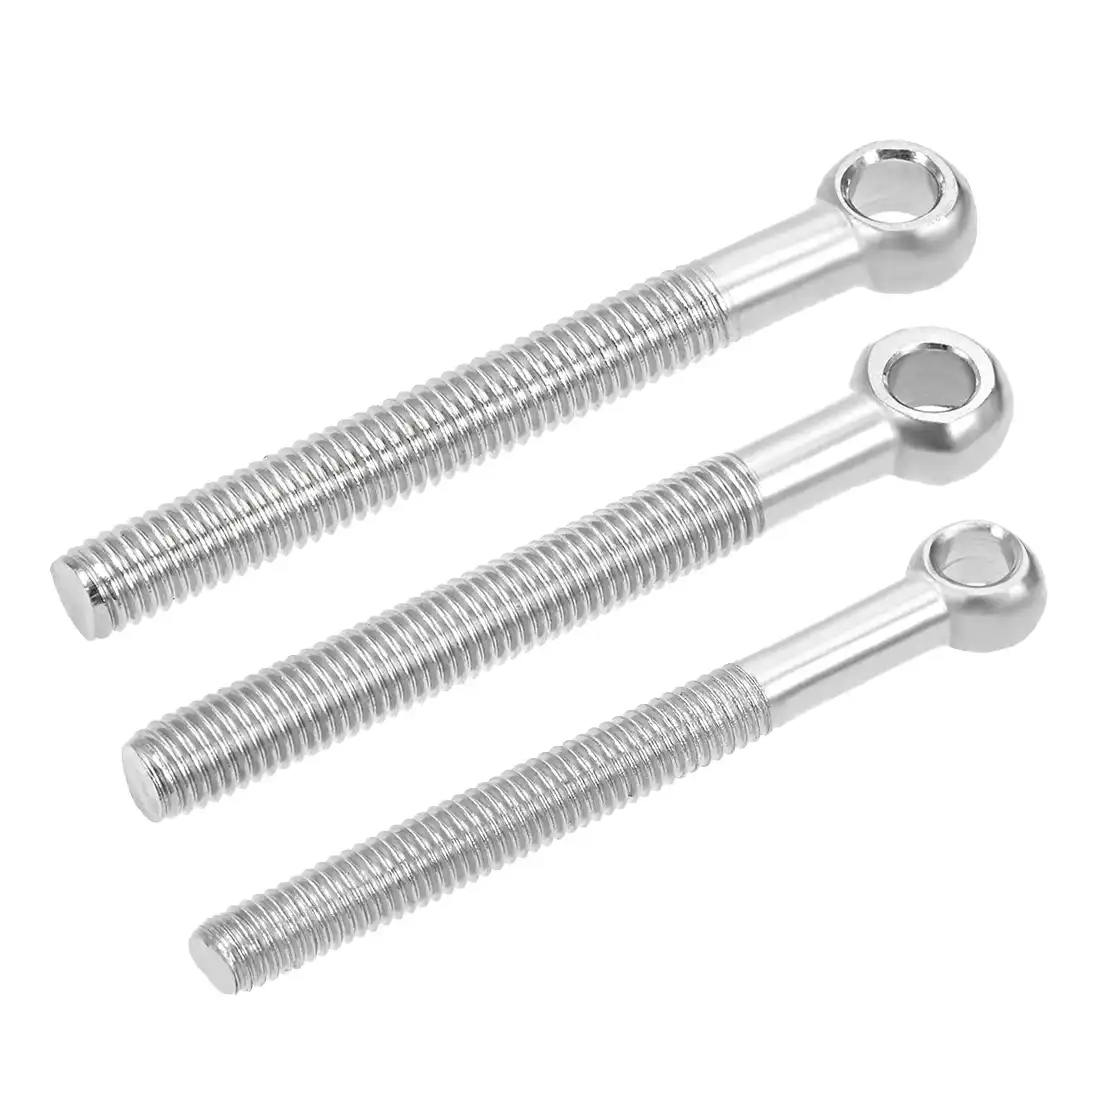 uxcell M6 x 40mm 304 Stainless Steel Machine Shoulder Lift Eye Bolt Rigging 20pcs 